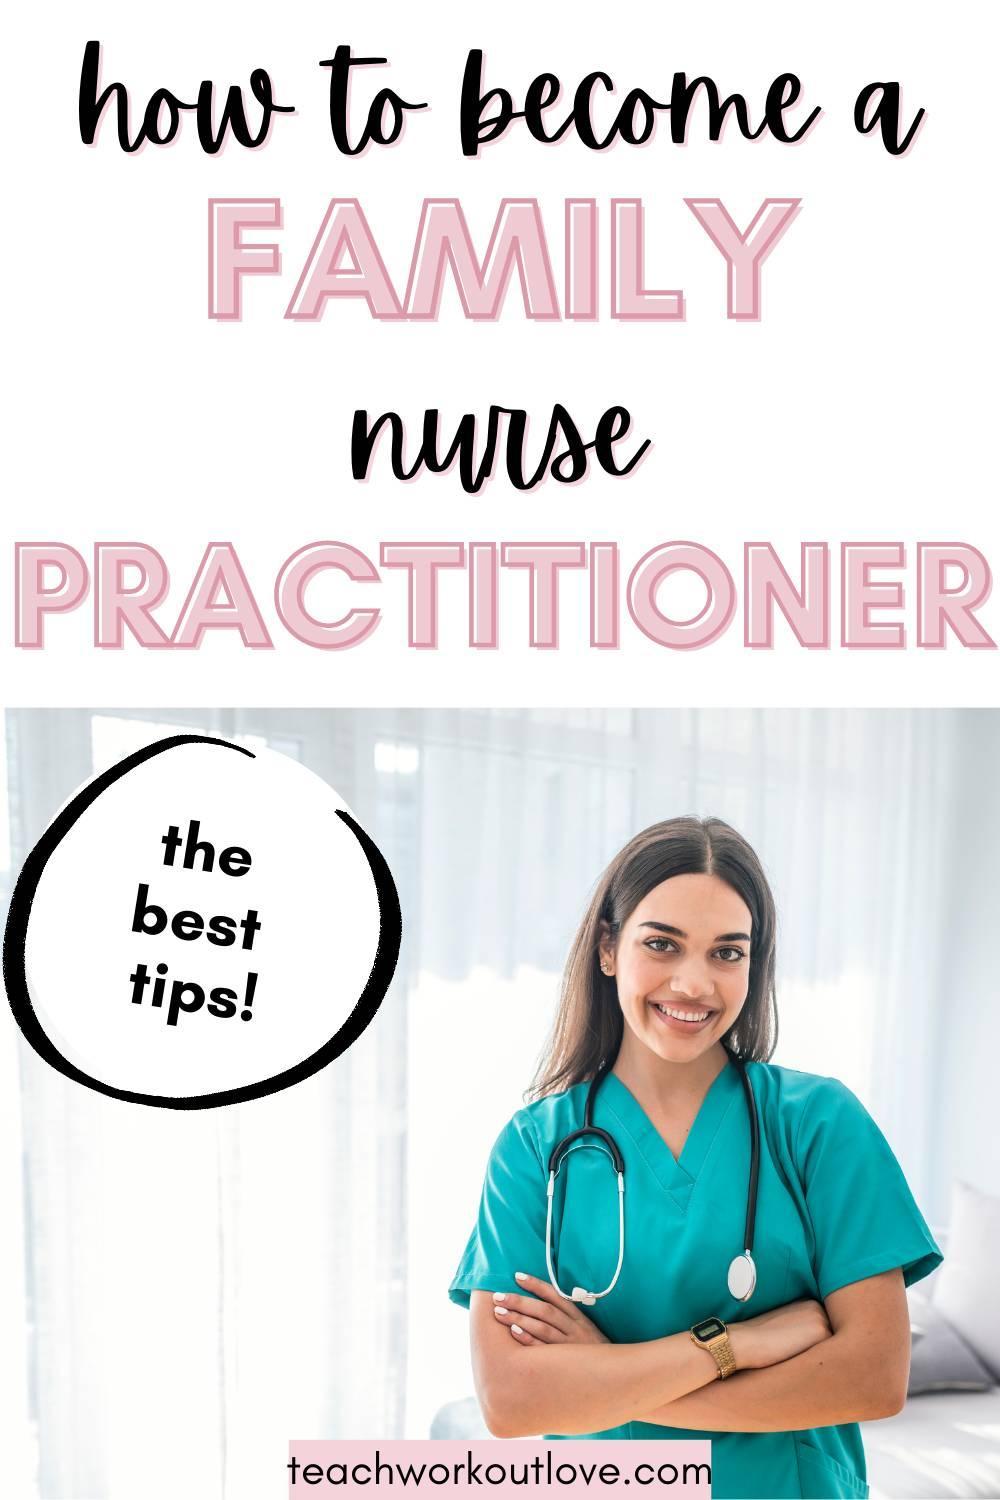 If you are passionate about helping others, then becoming a family nurse practitioner could be the ideal career choice for you.